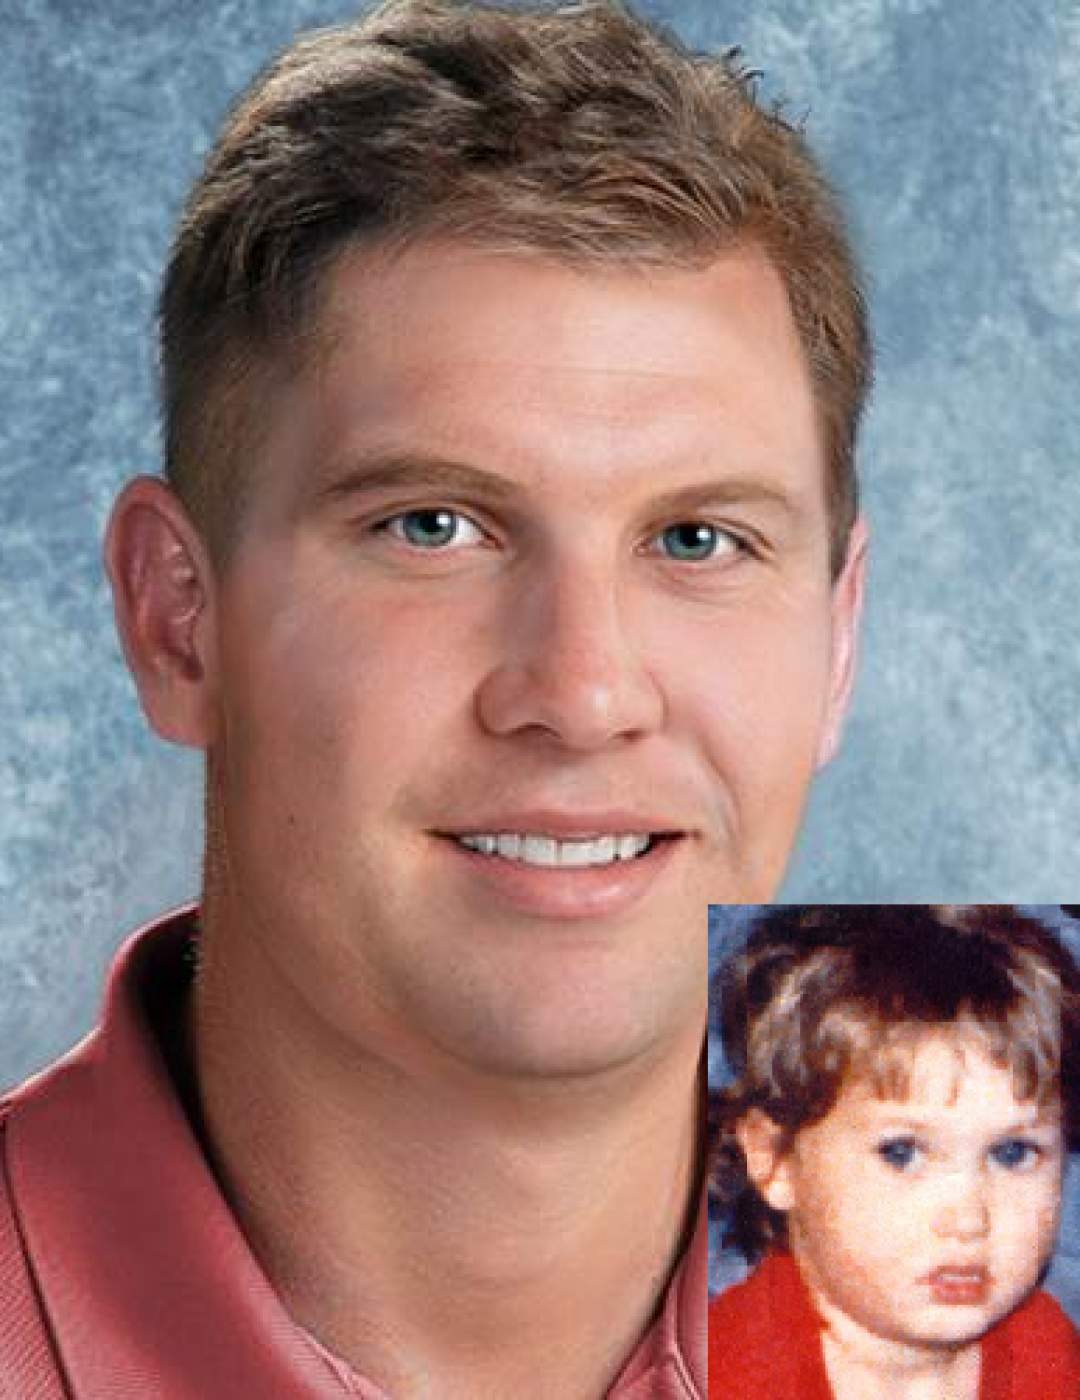 Kevin Ayotte. Missing child with blonde hair and blue eyes. Age progressed photo shows what Kevin looks like at 36 years old: adult man with short blonde hair and blue eyes.